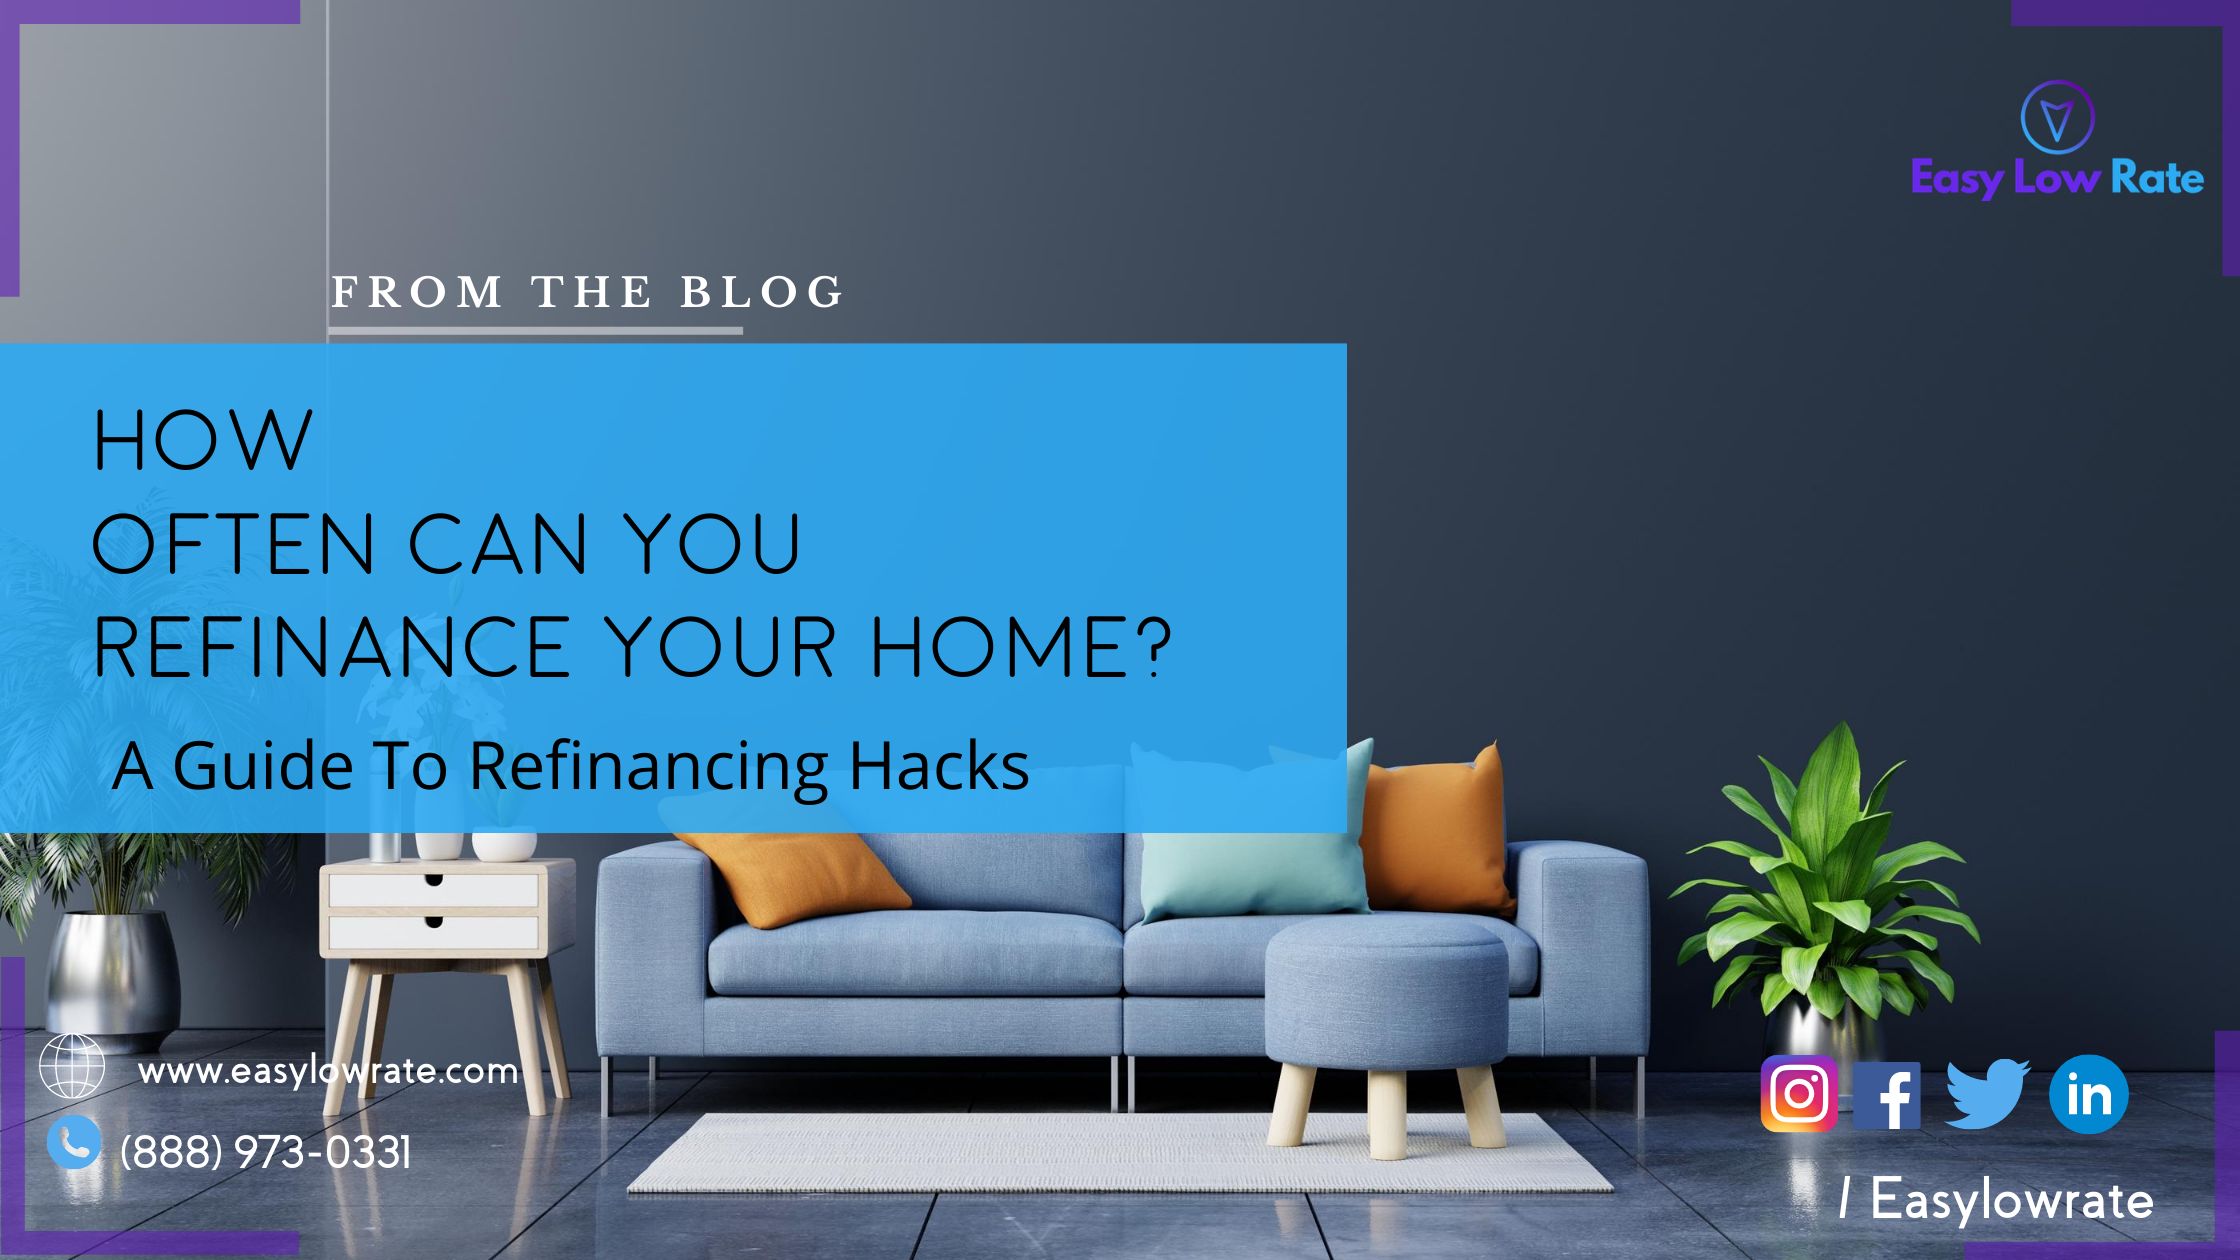 How often can you refinance your home a guide to refinancing hacks